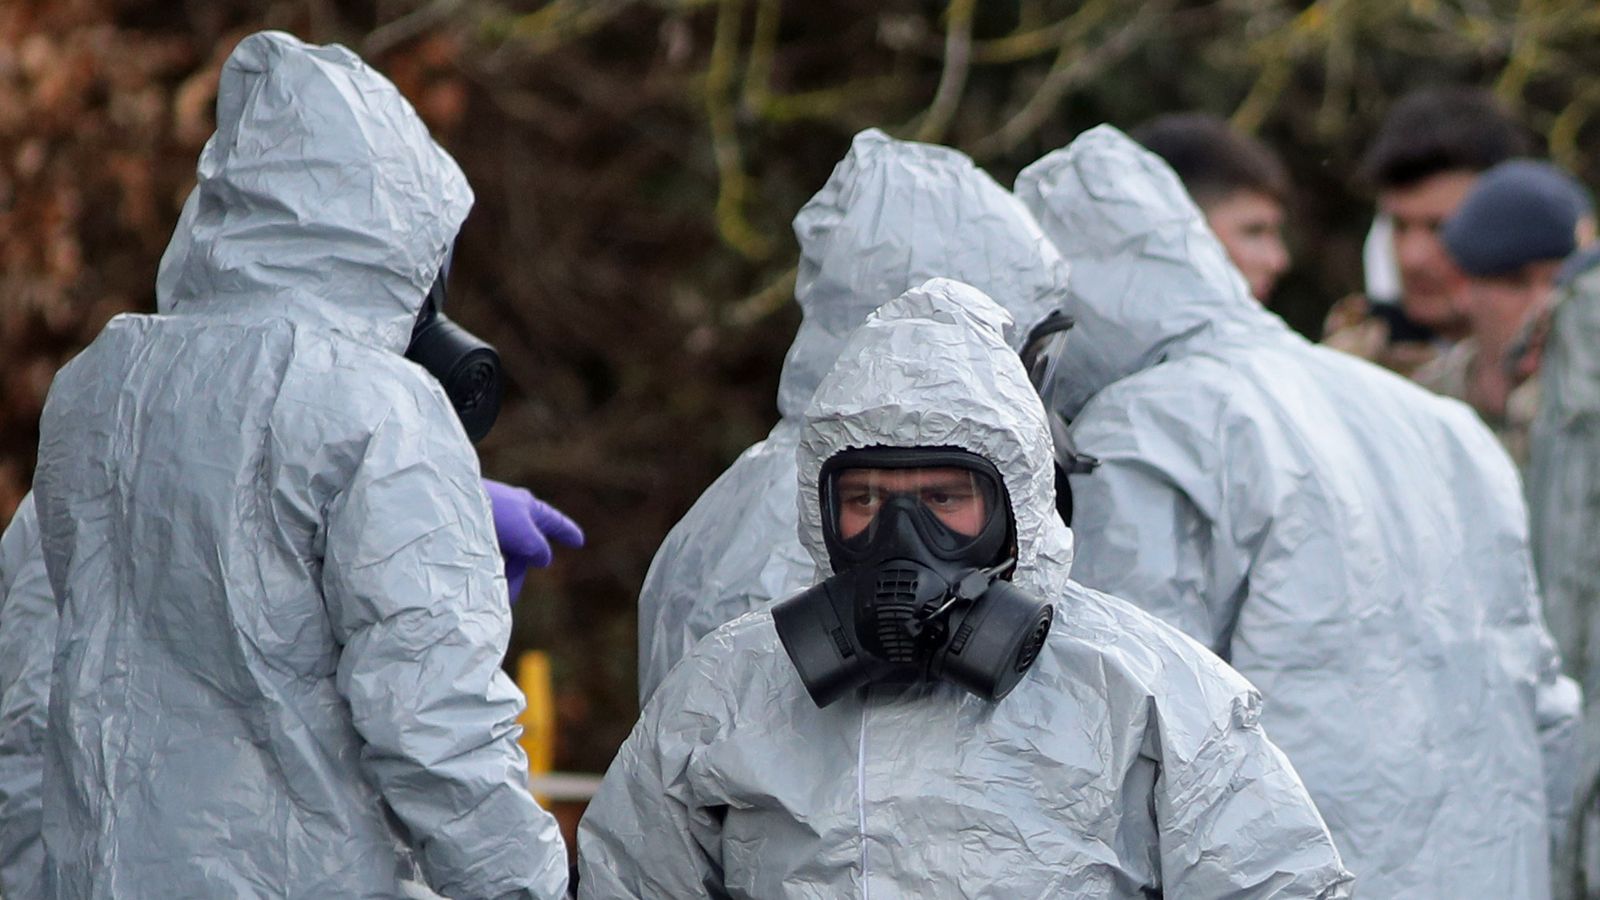 'People are still impacted': Public health chief Tracy Daszkiewicz who helped lead response to Salisbury spy poisonings reflects on incident five years on